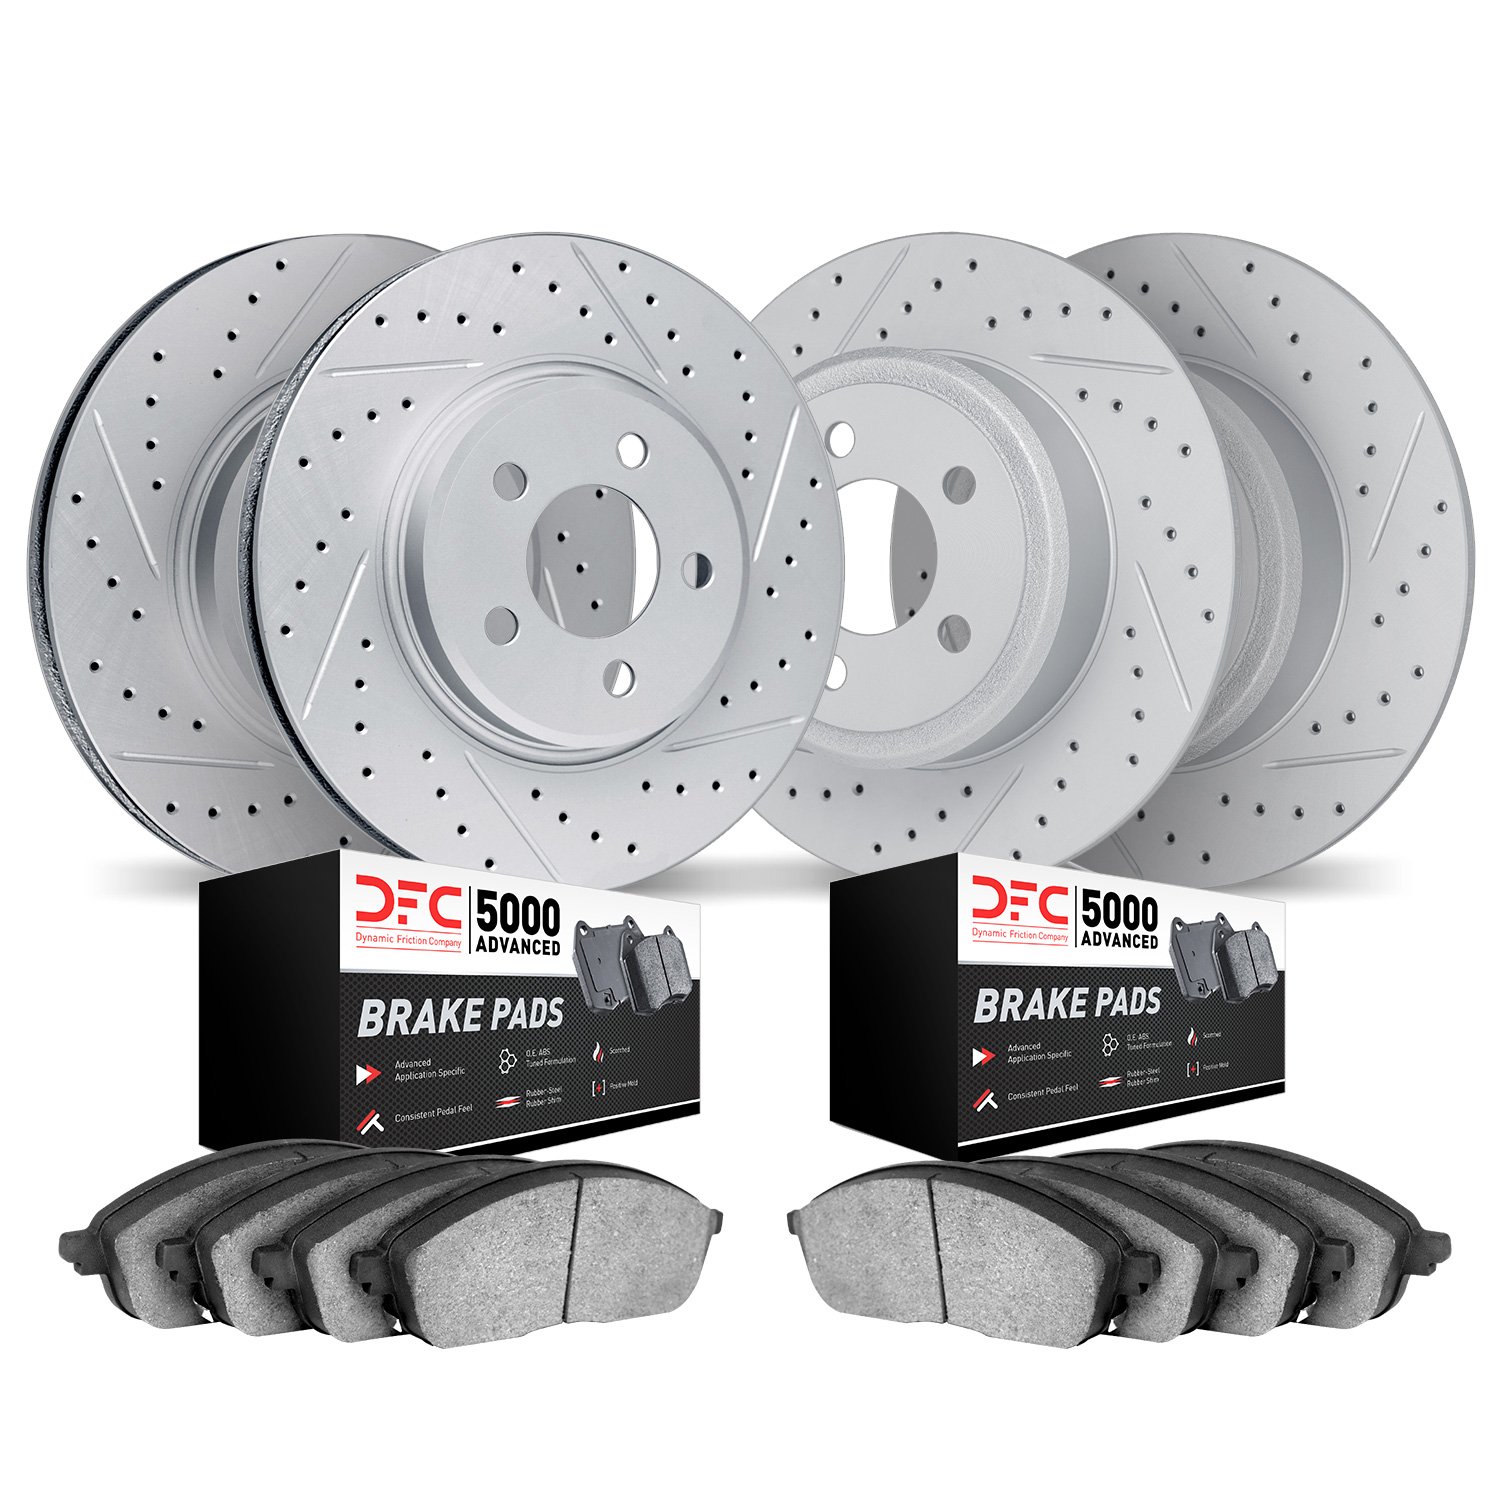 2504-76093 Geoperformance Drilled/Slotted Rotors w/5000 Advanced Brake Pads Kit, 2001-2003 Lexus/Toyota/Scion, Position: Front a